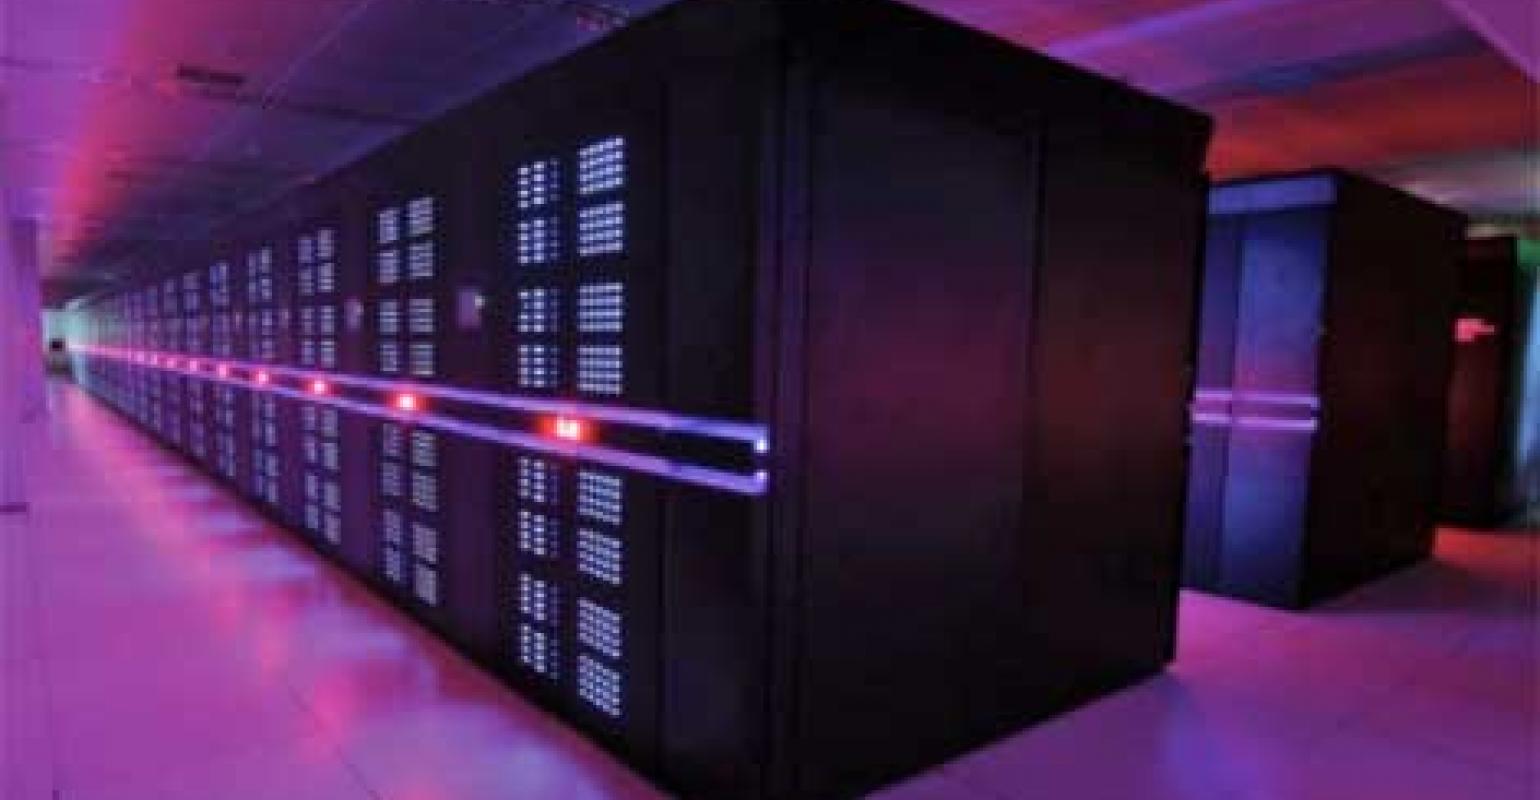 China's Milky Way-2 Is World's Top Supercomputer | Data Center Knowledge